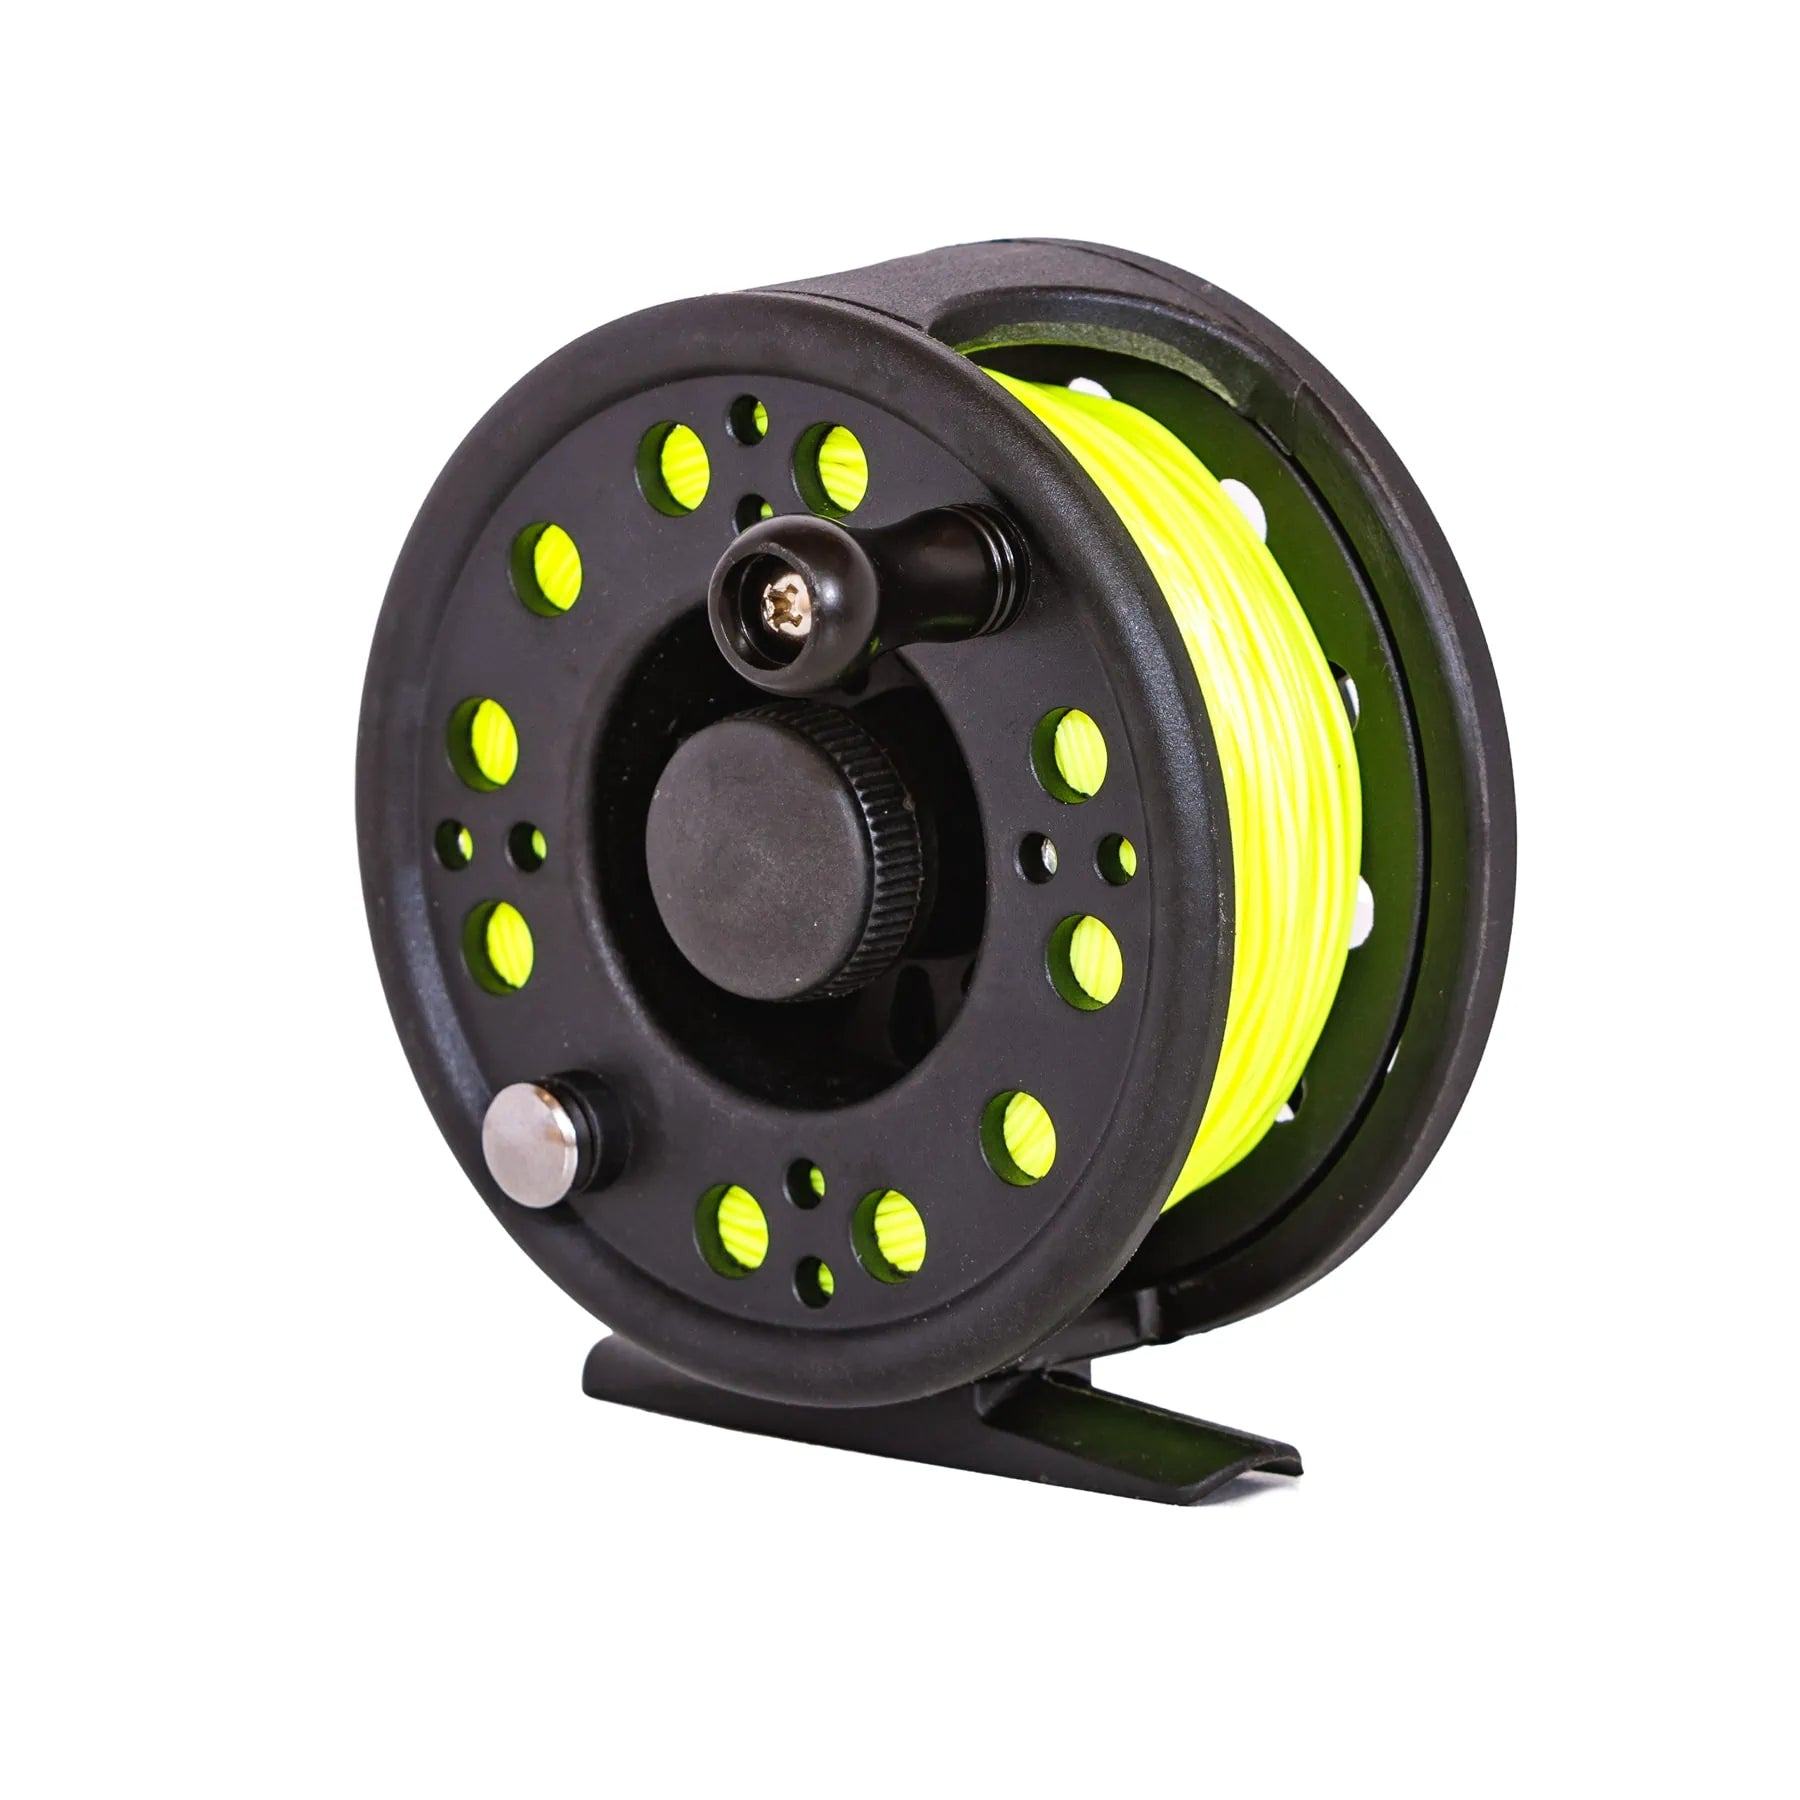 Silvertip II 5/6 Fly Fishing Reel Spooled With 5WT Fly Line – Jackson Hole  Fly Company